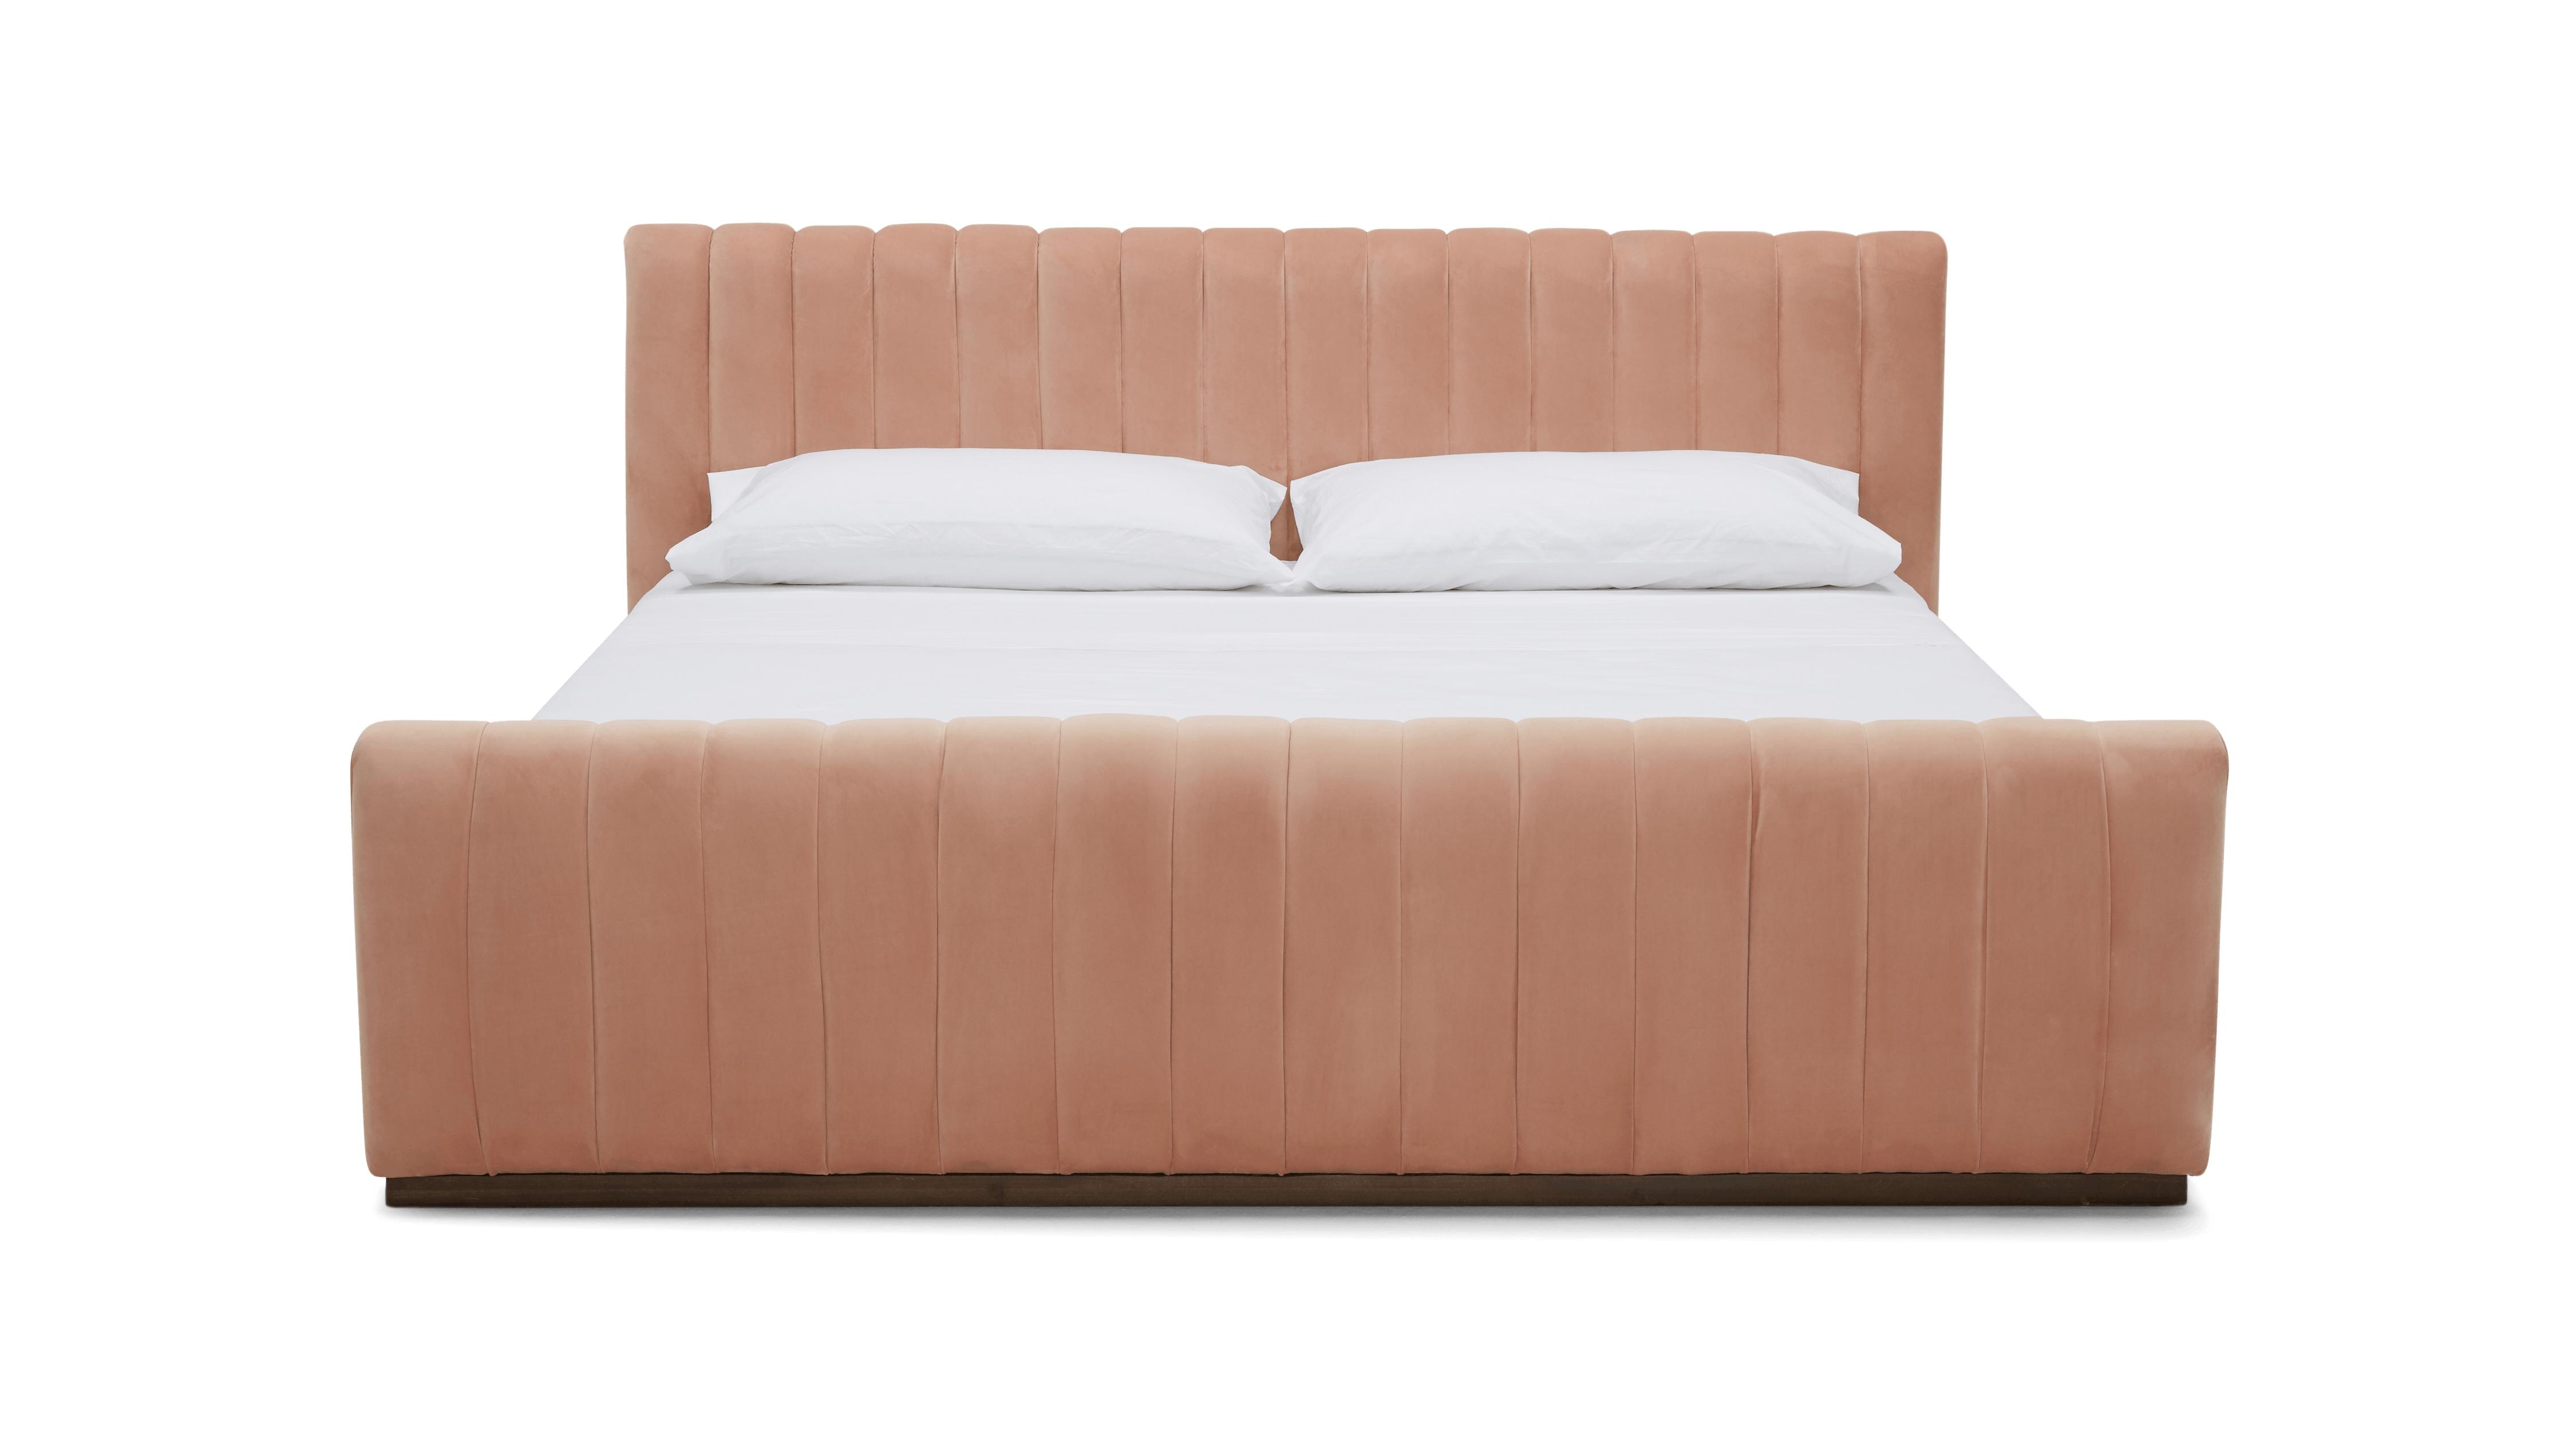 Pink Camille Mid Century Modern Bed - Royale Blush - Mocha - Cal King - Image 0